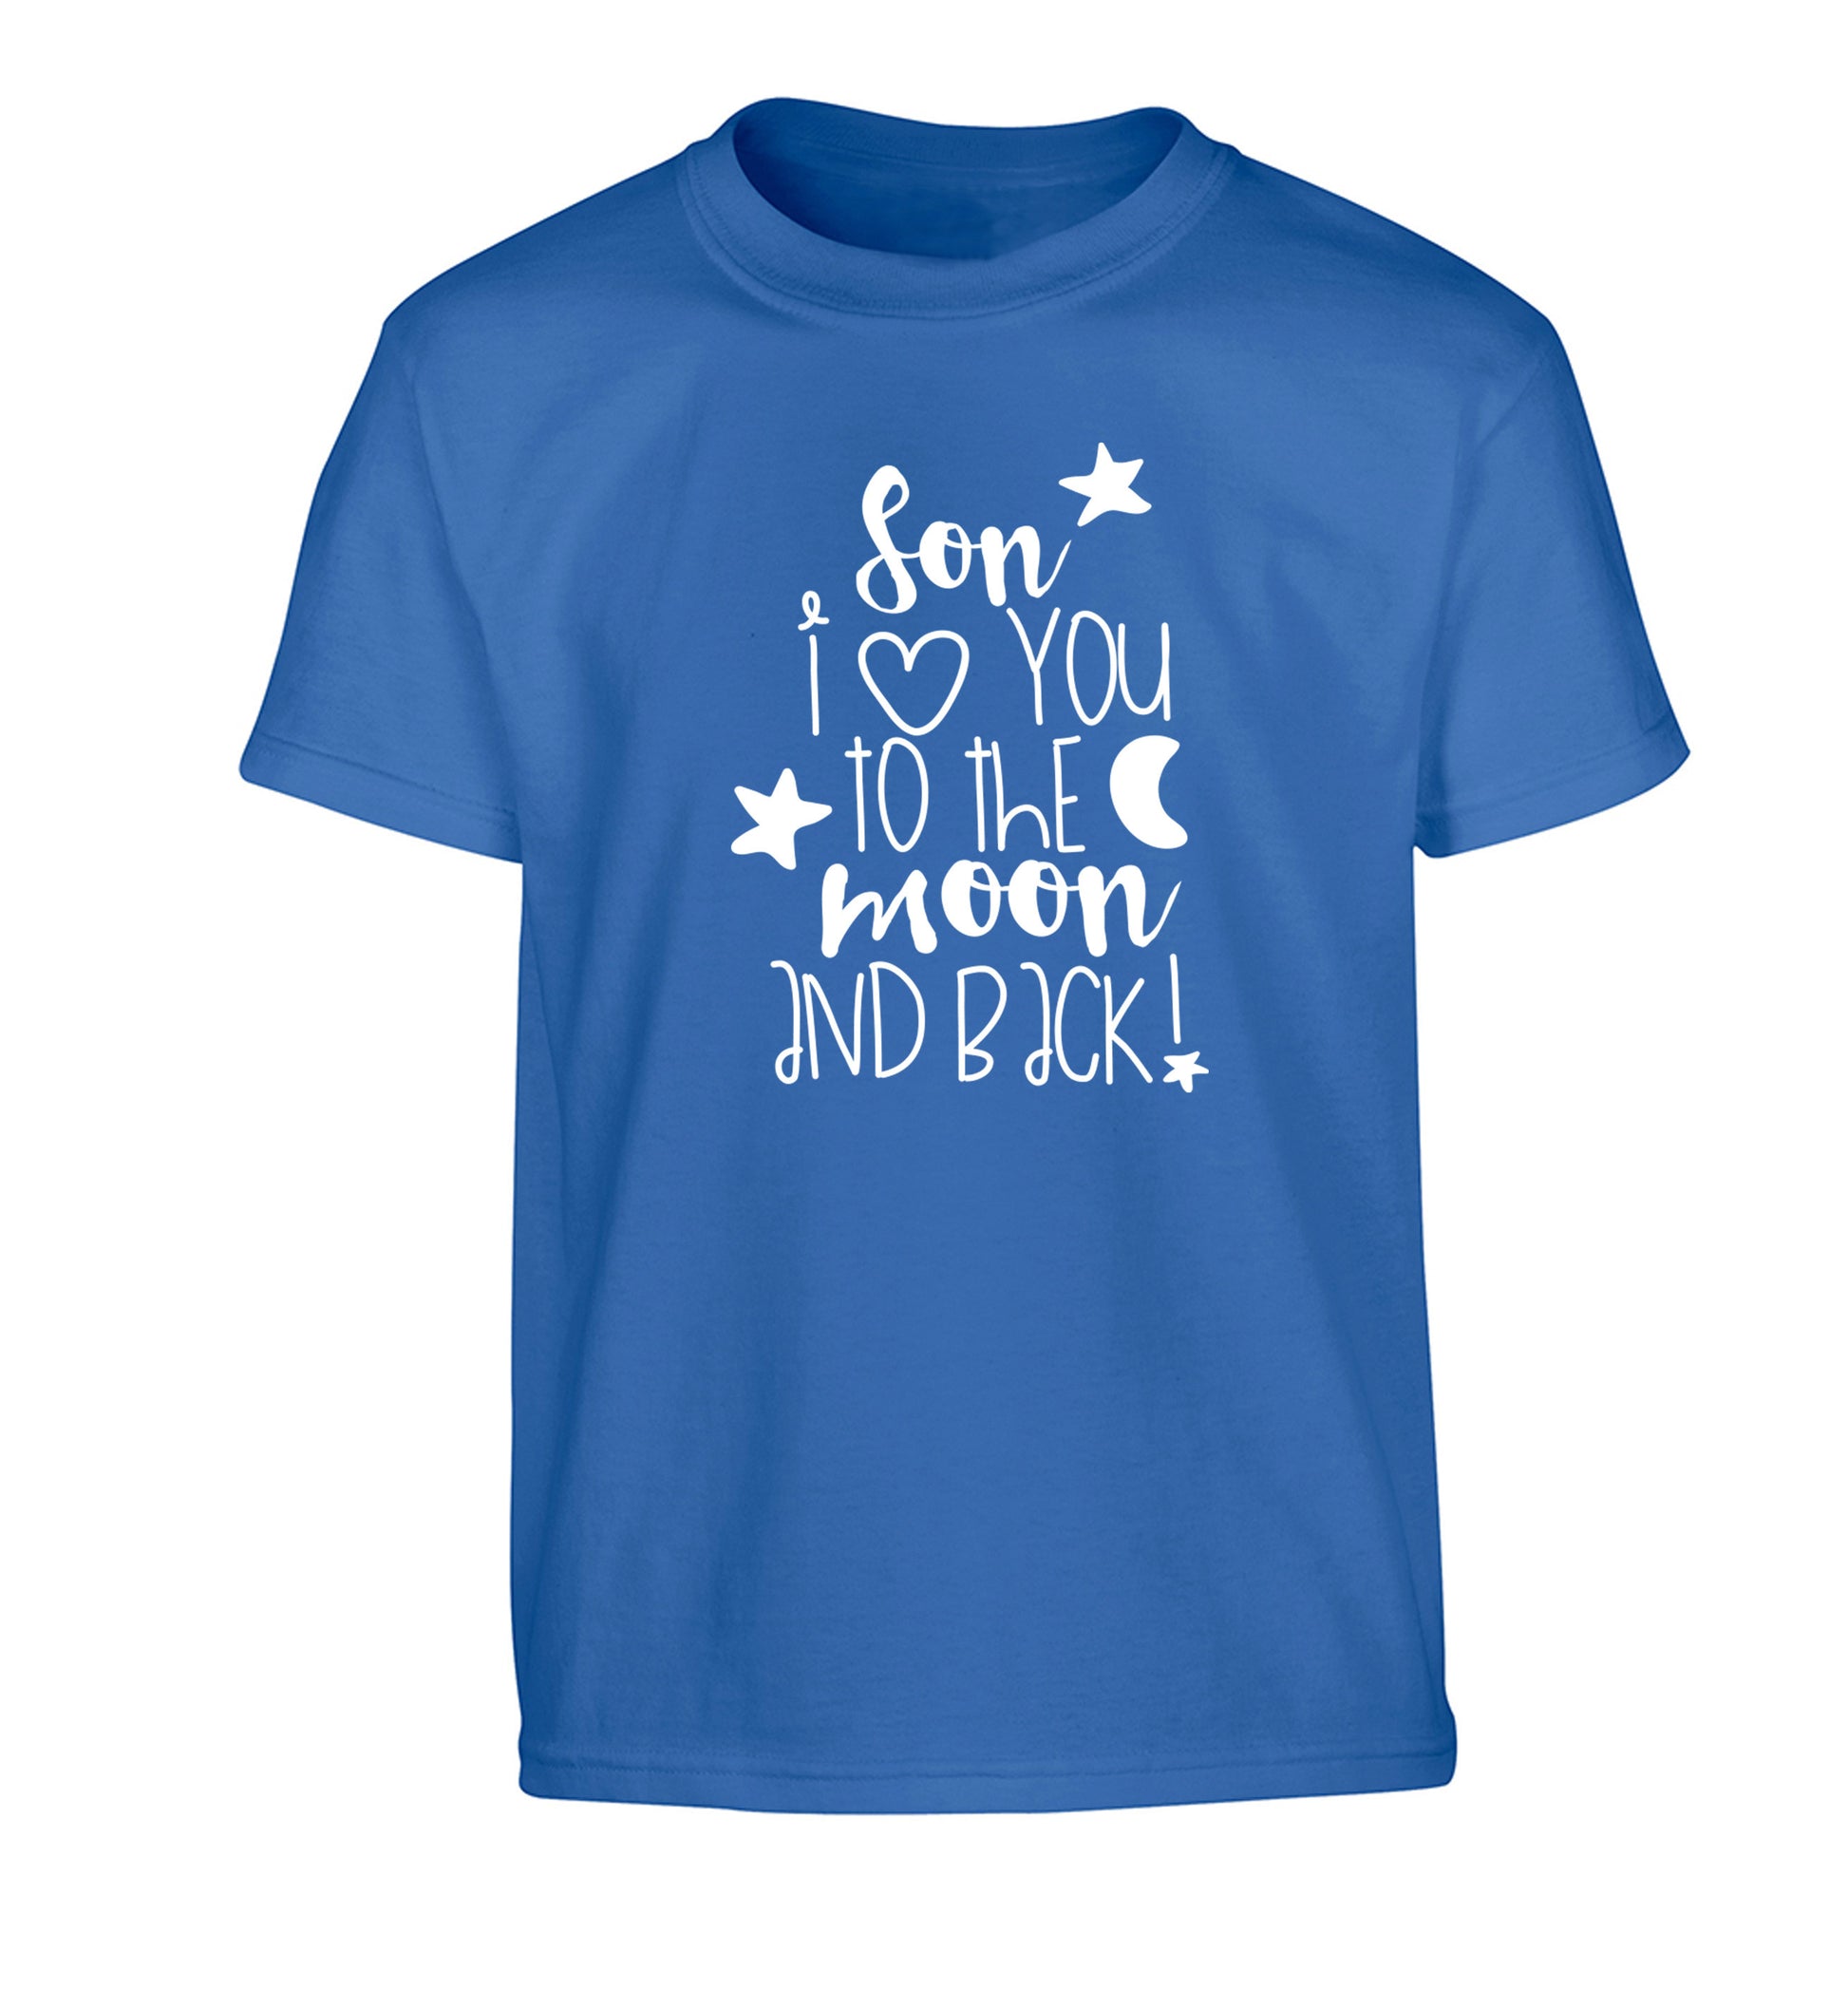 Son I love you to the moon and back Children's blue Tshirt 12-14 Years